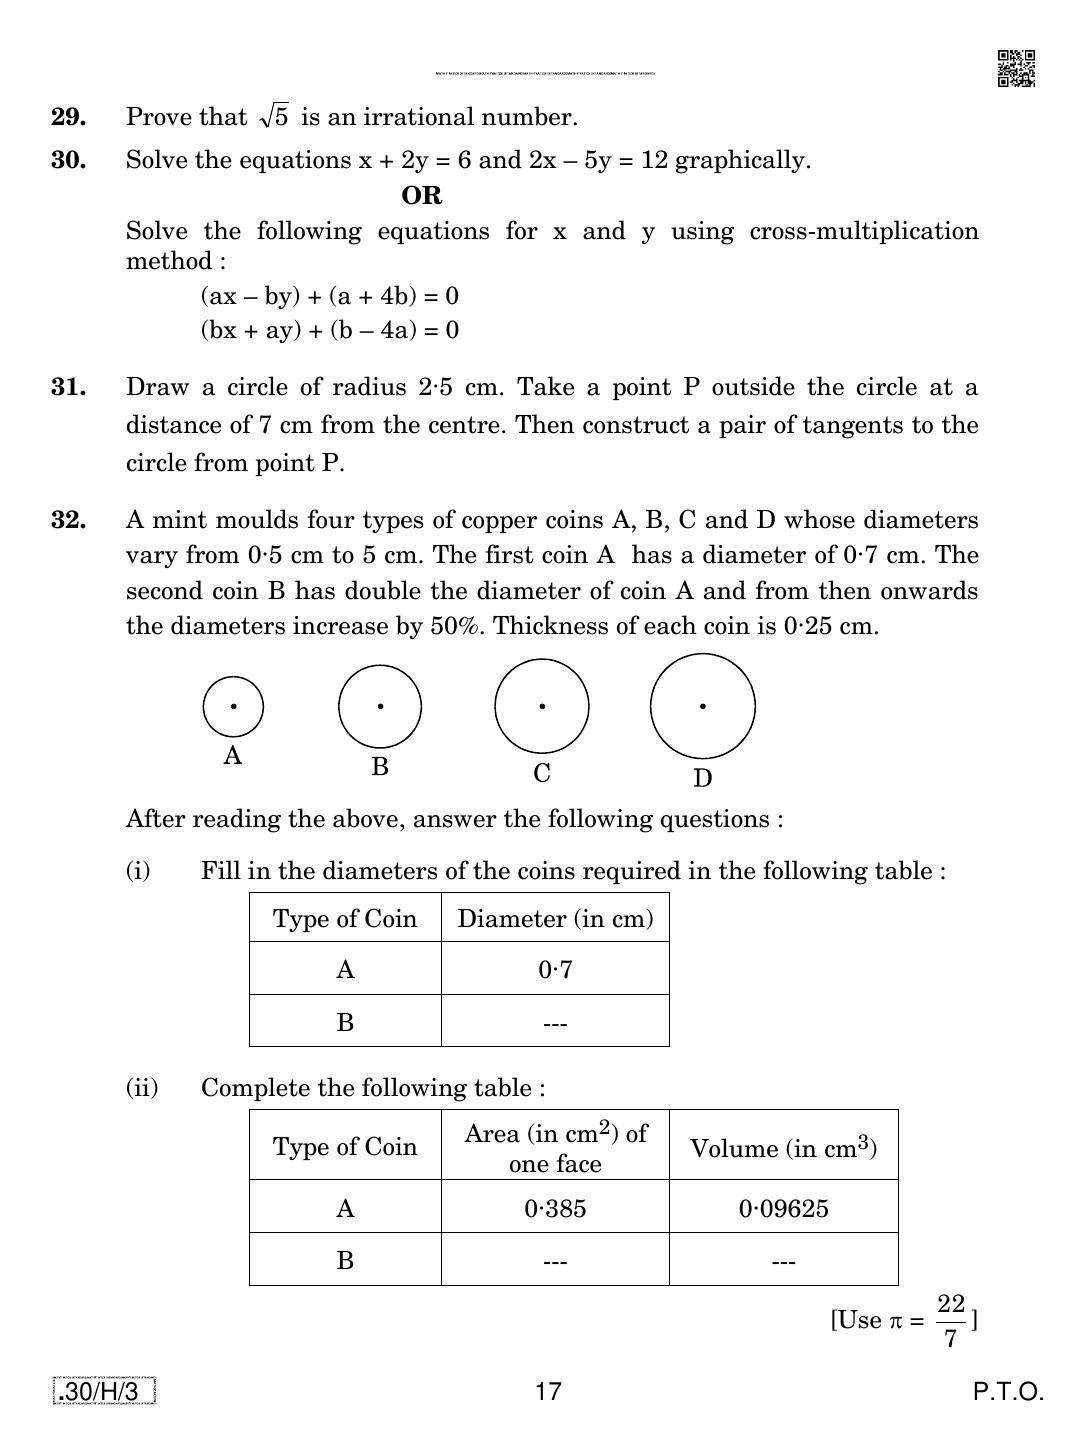 CBSE Class 10 30-C-3 - Maths (Standard) 2020 Compartment Question Paper - Page 17